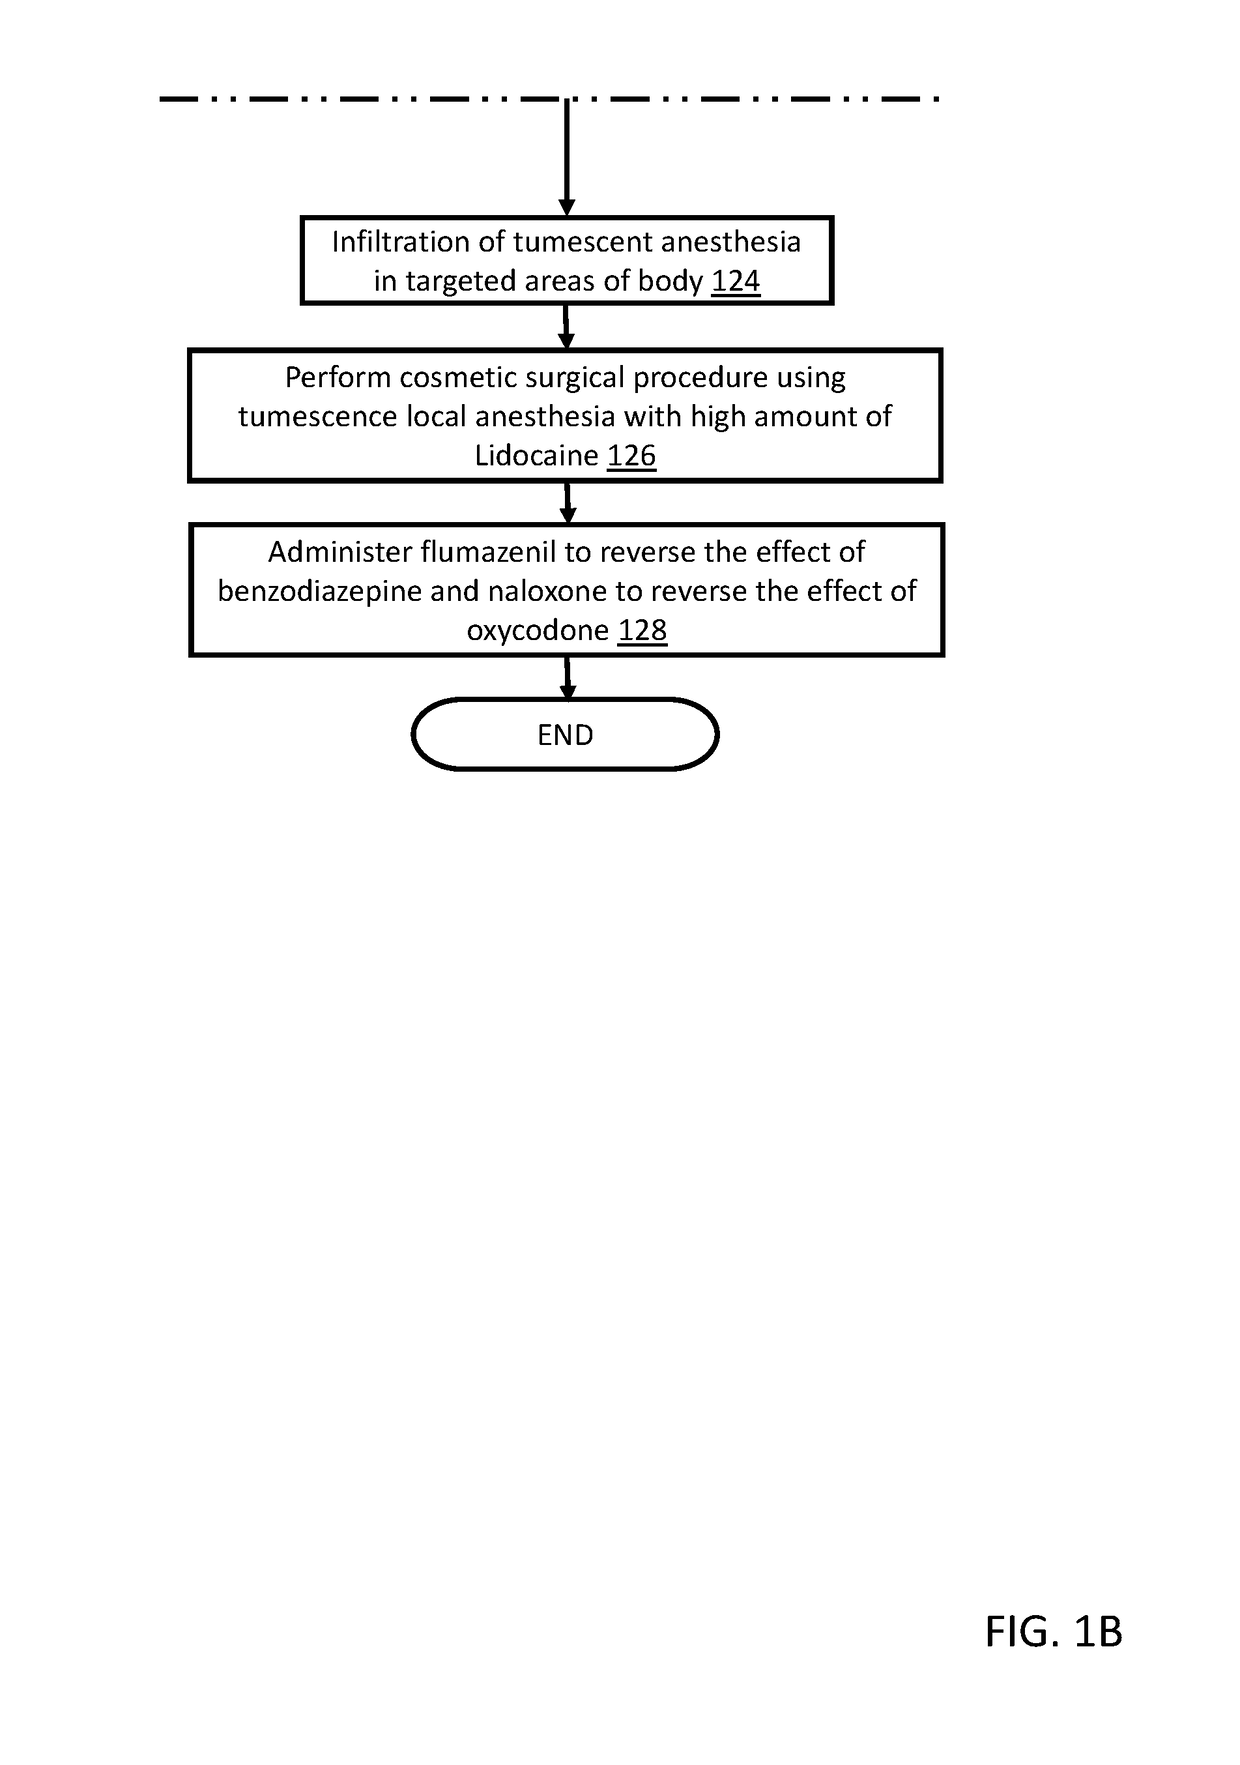 Method for performing cosmetic surgical procedures using tumescent anesthesia and oral sedation